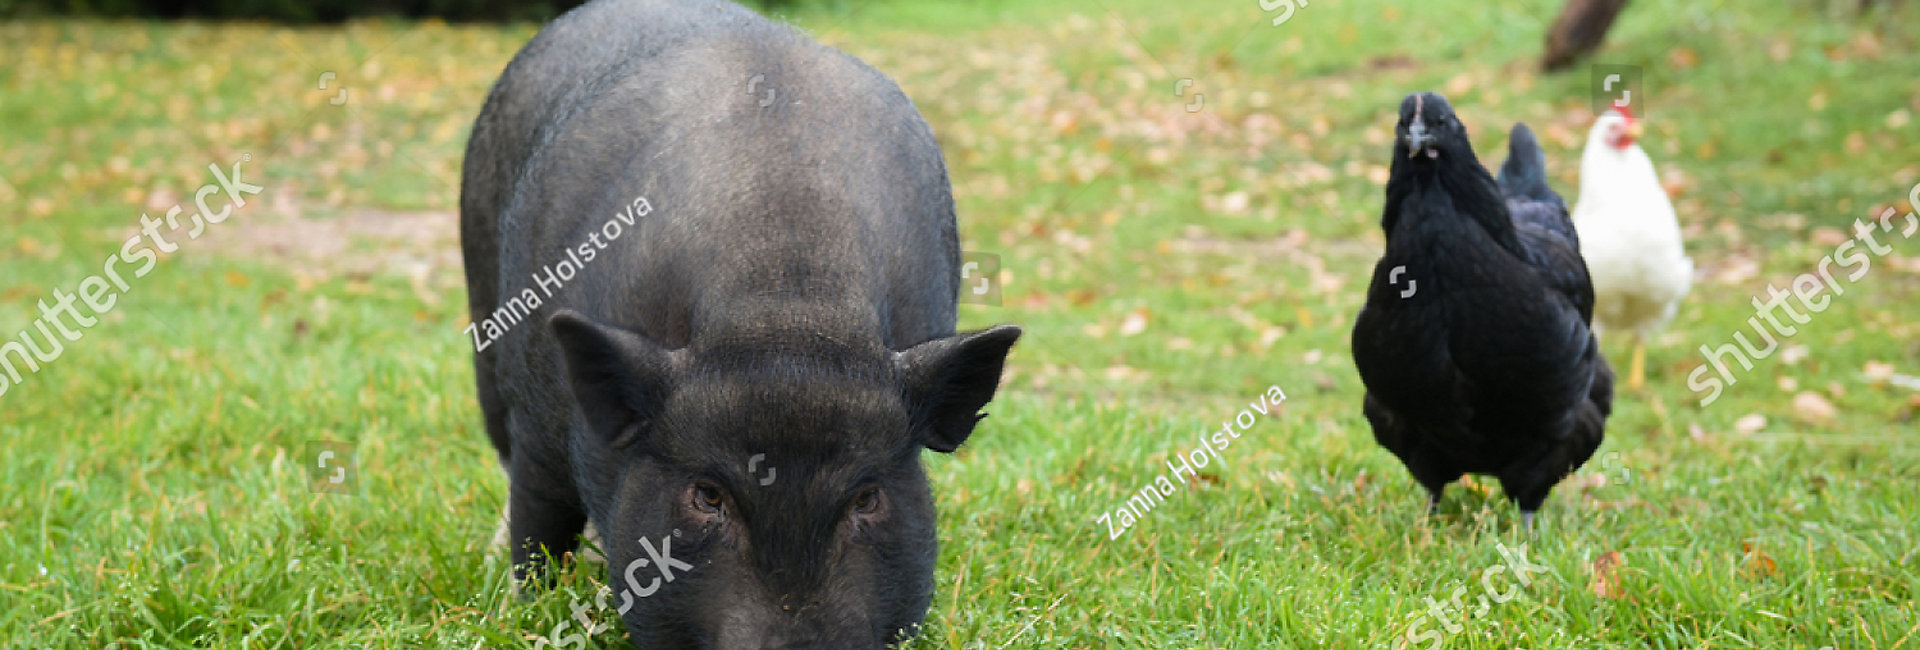 stock-photo-funny-black-a-pig-in-the-yard-774084469